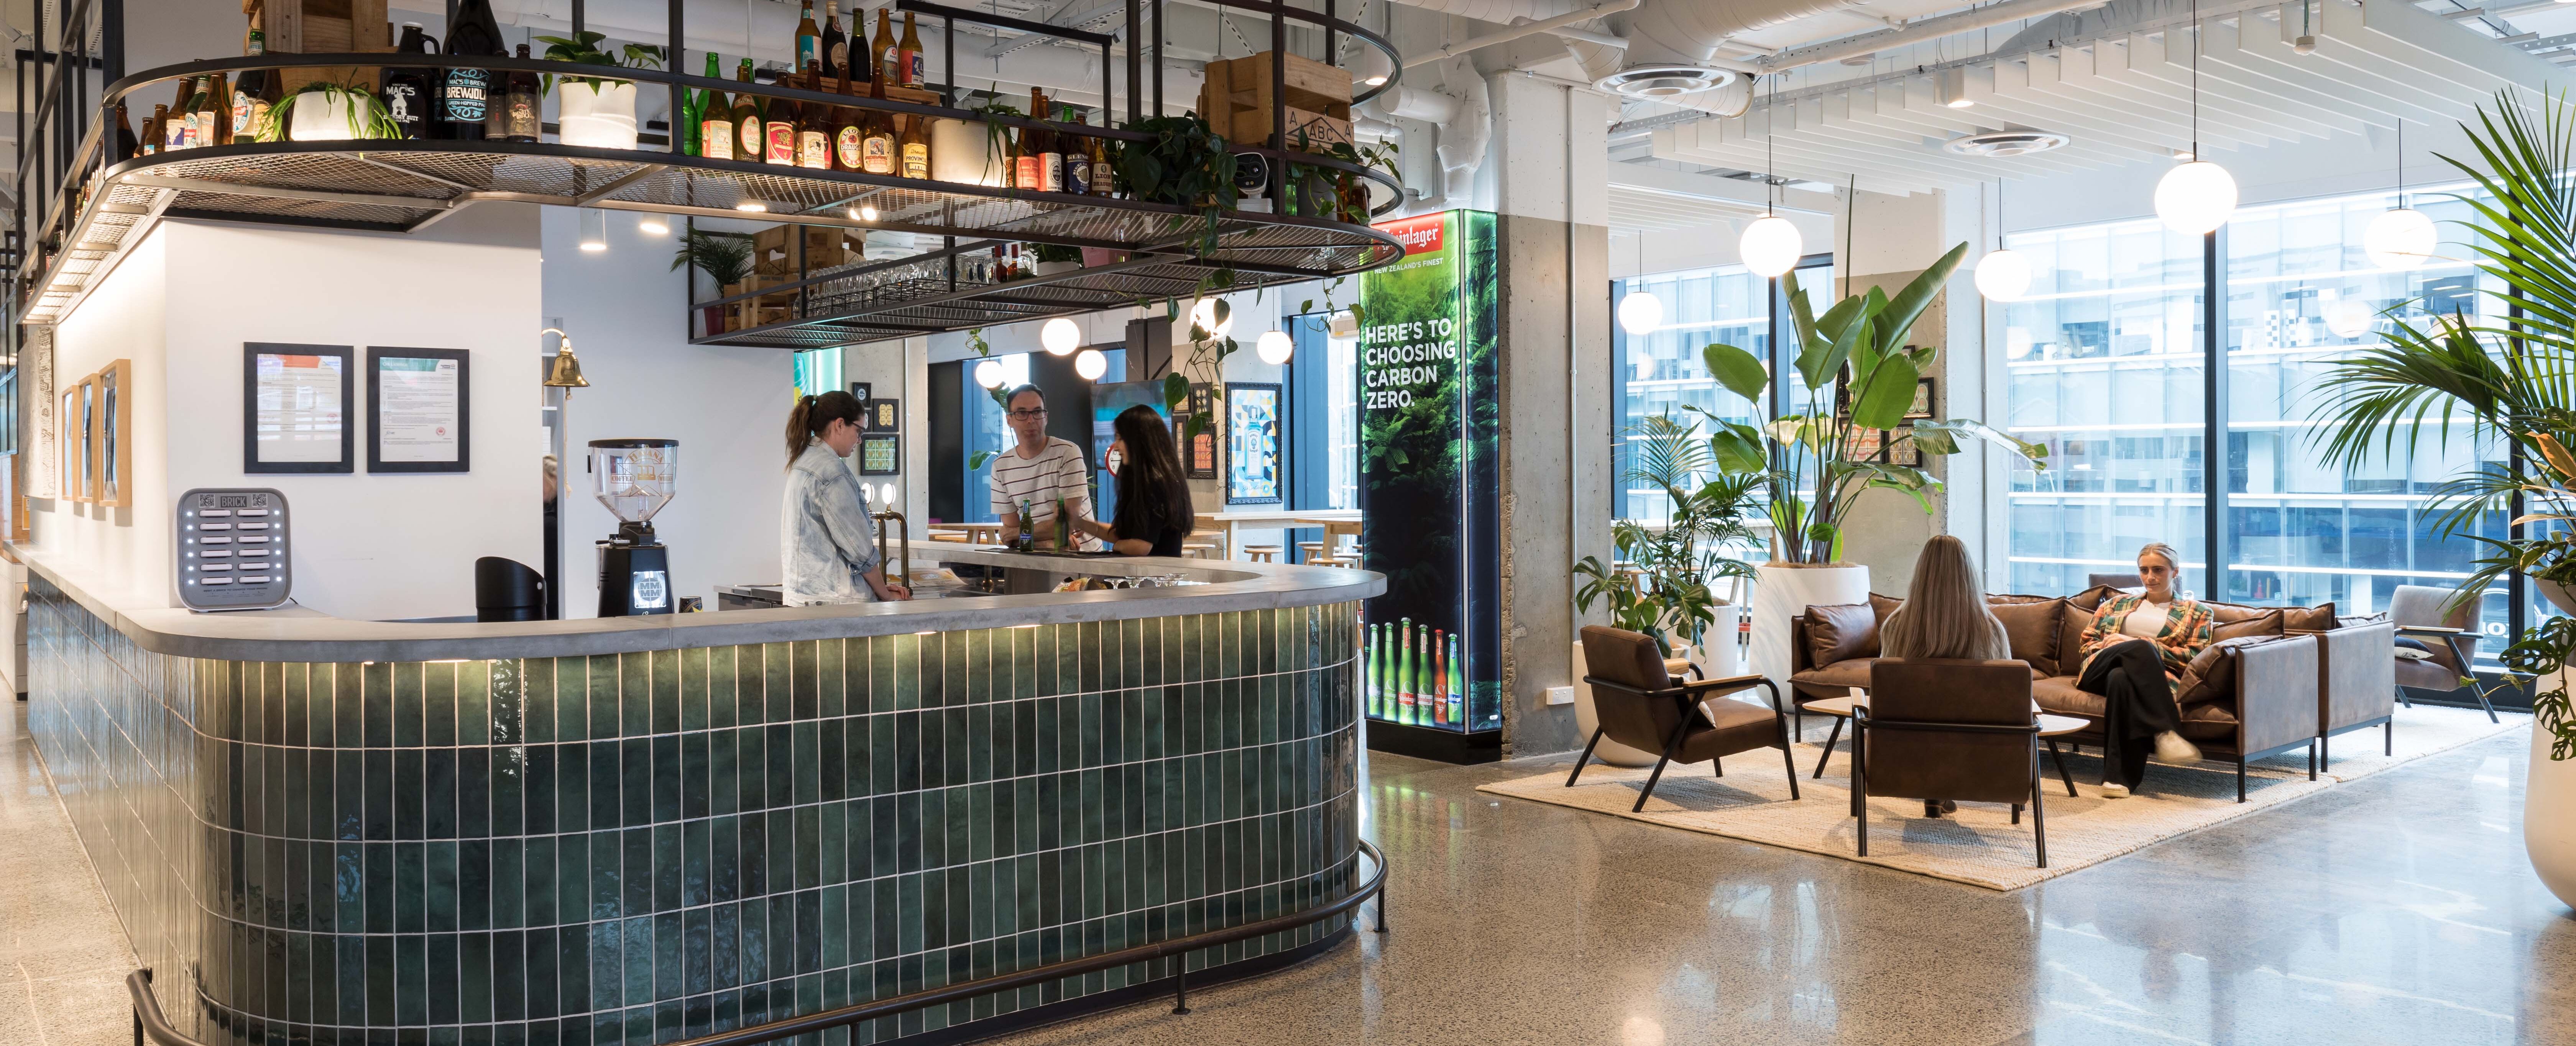 Lion HQ in Auckland with a fun and social interior vibe.